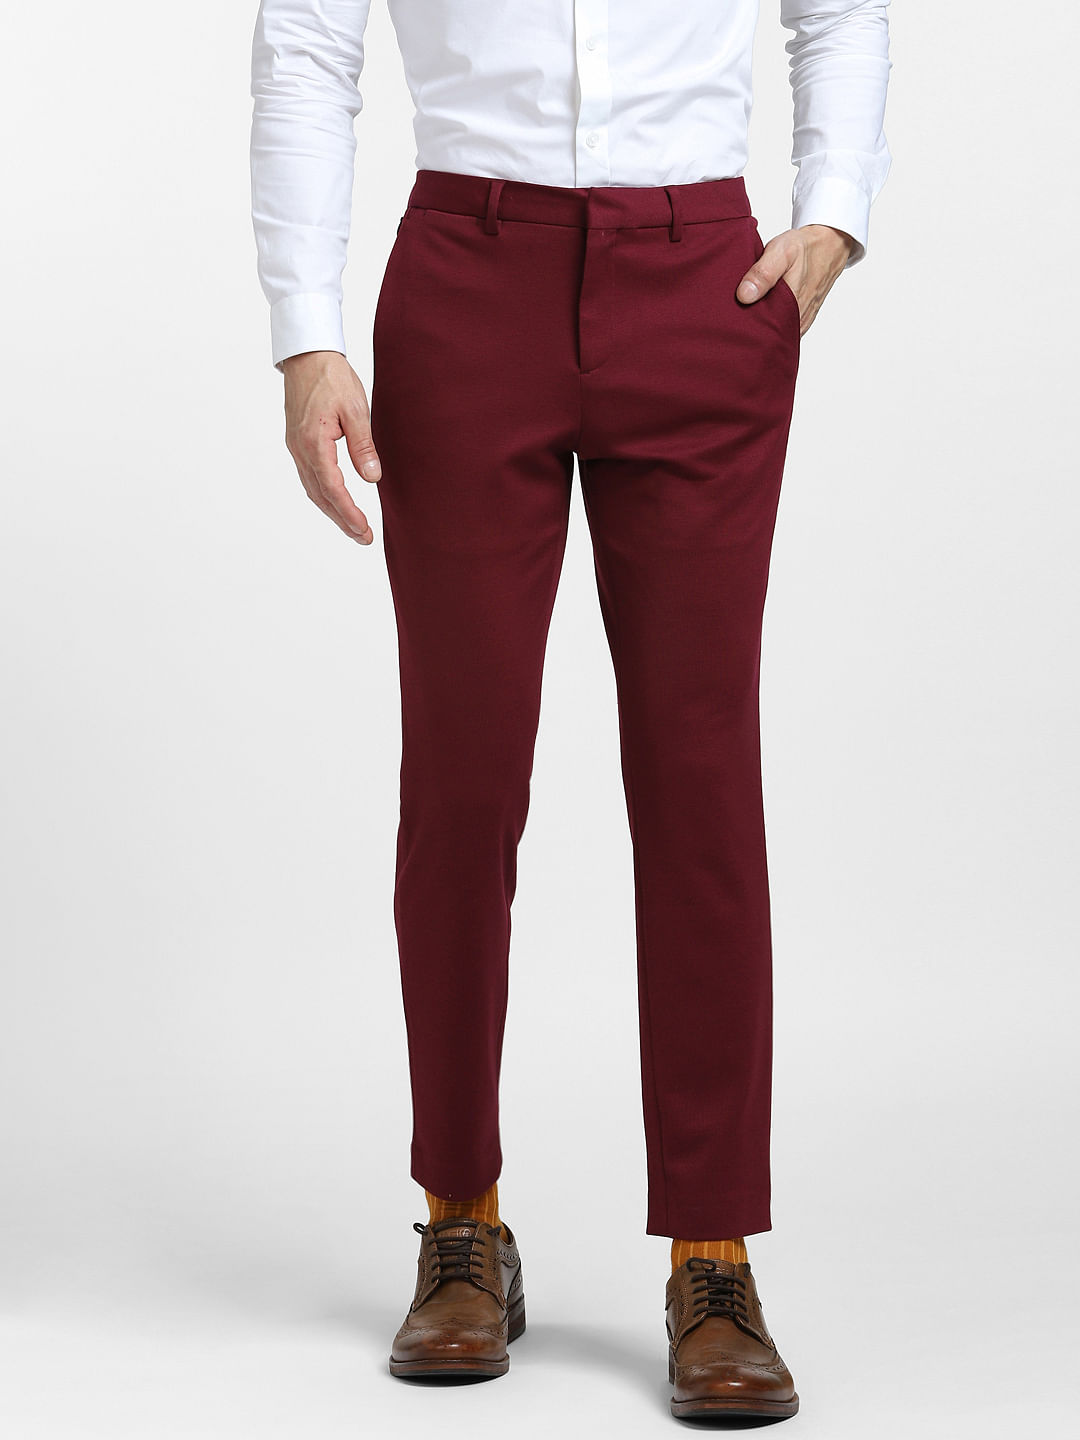 maroon pants with navy shirt｜TikTok Search